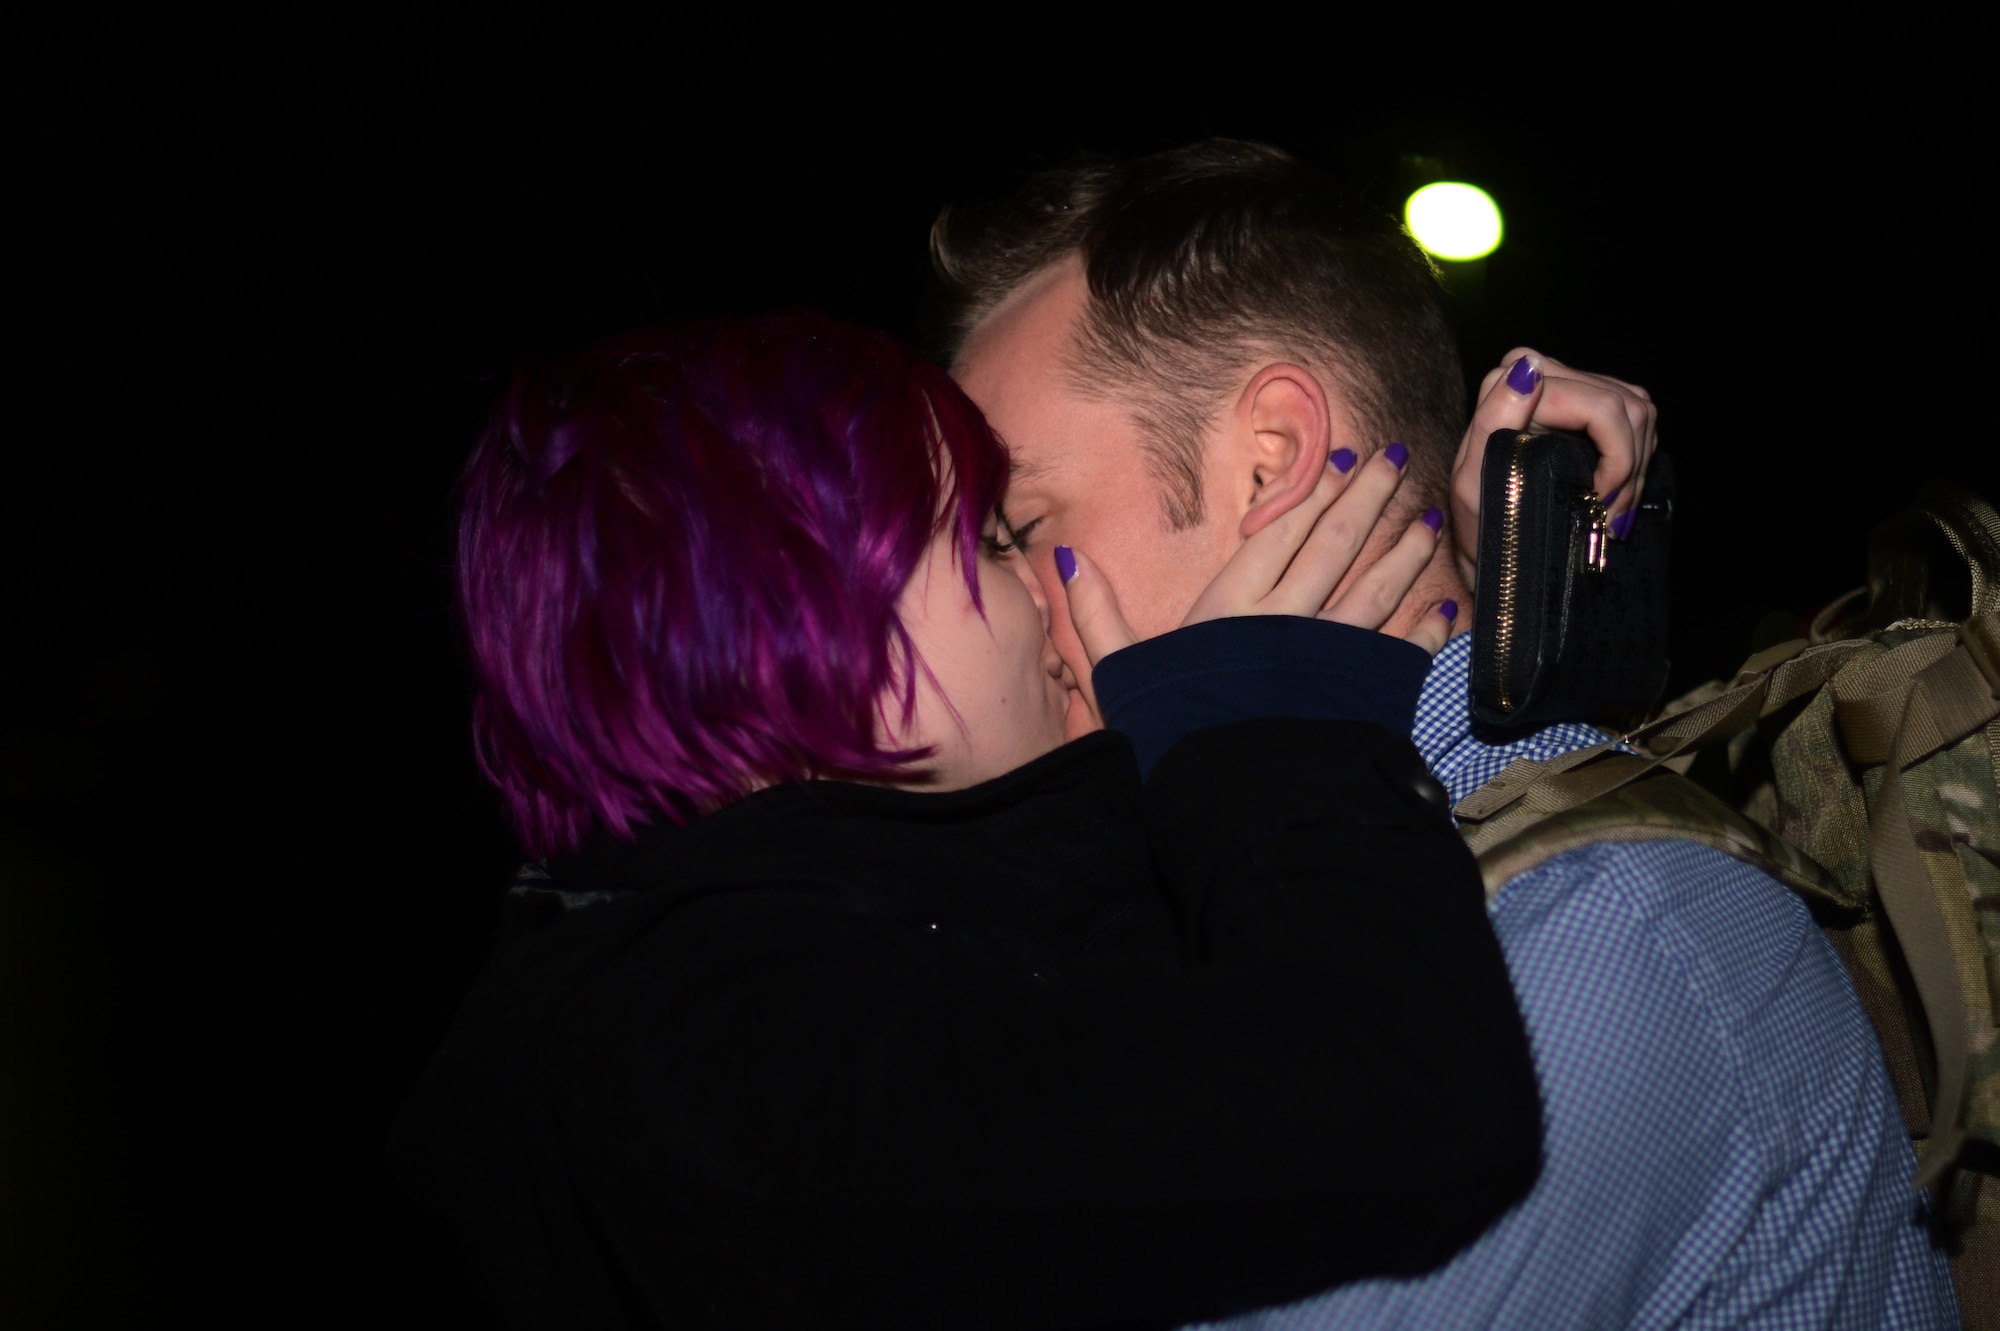 U.S. Air Force Senior Airman Julian Chesser, a 606th Air Control Squadron interface control technician and native of Prattville, Ala., right, kisses his fiancée, Kessia Unger, on Spangdahlem Air Base, Germany, Oct. 7, 2014, before departing for a deployment to an undisclosed location in Southwest Asia. Members of the 606th ACS departed for Southwest Asia to provide air defense of the Arabian Gulf in support of Operation Enduring Freedom. (U.S. Air Force photo by Senior Airman Gustavo Castillo/Released) 